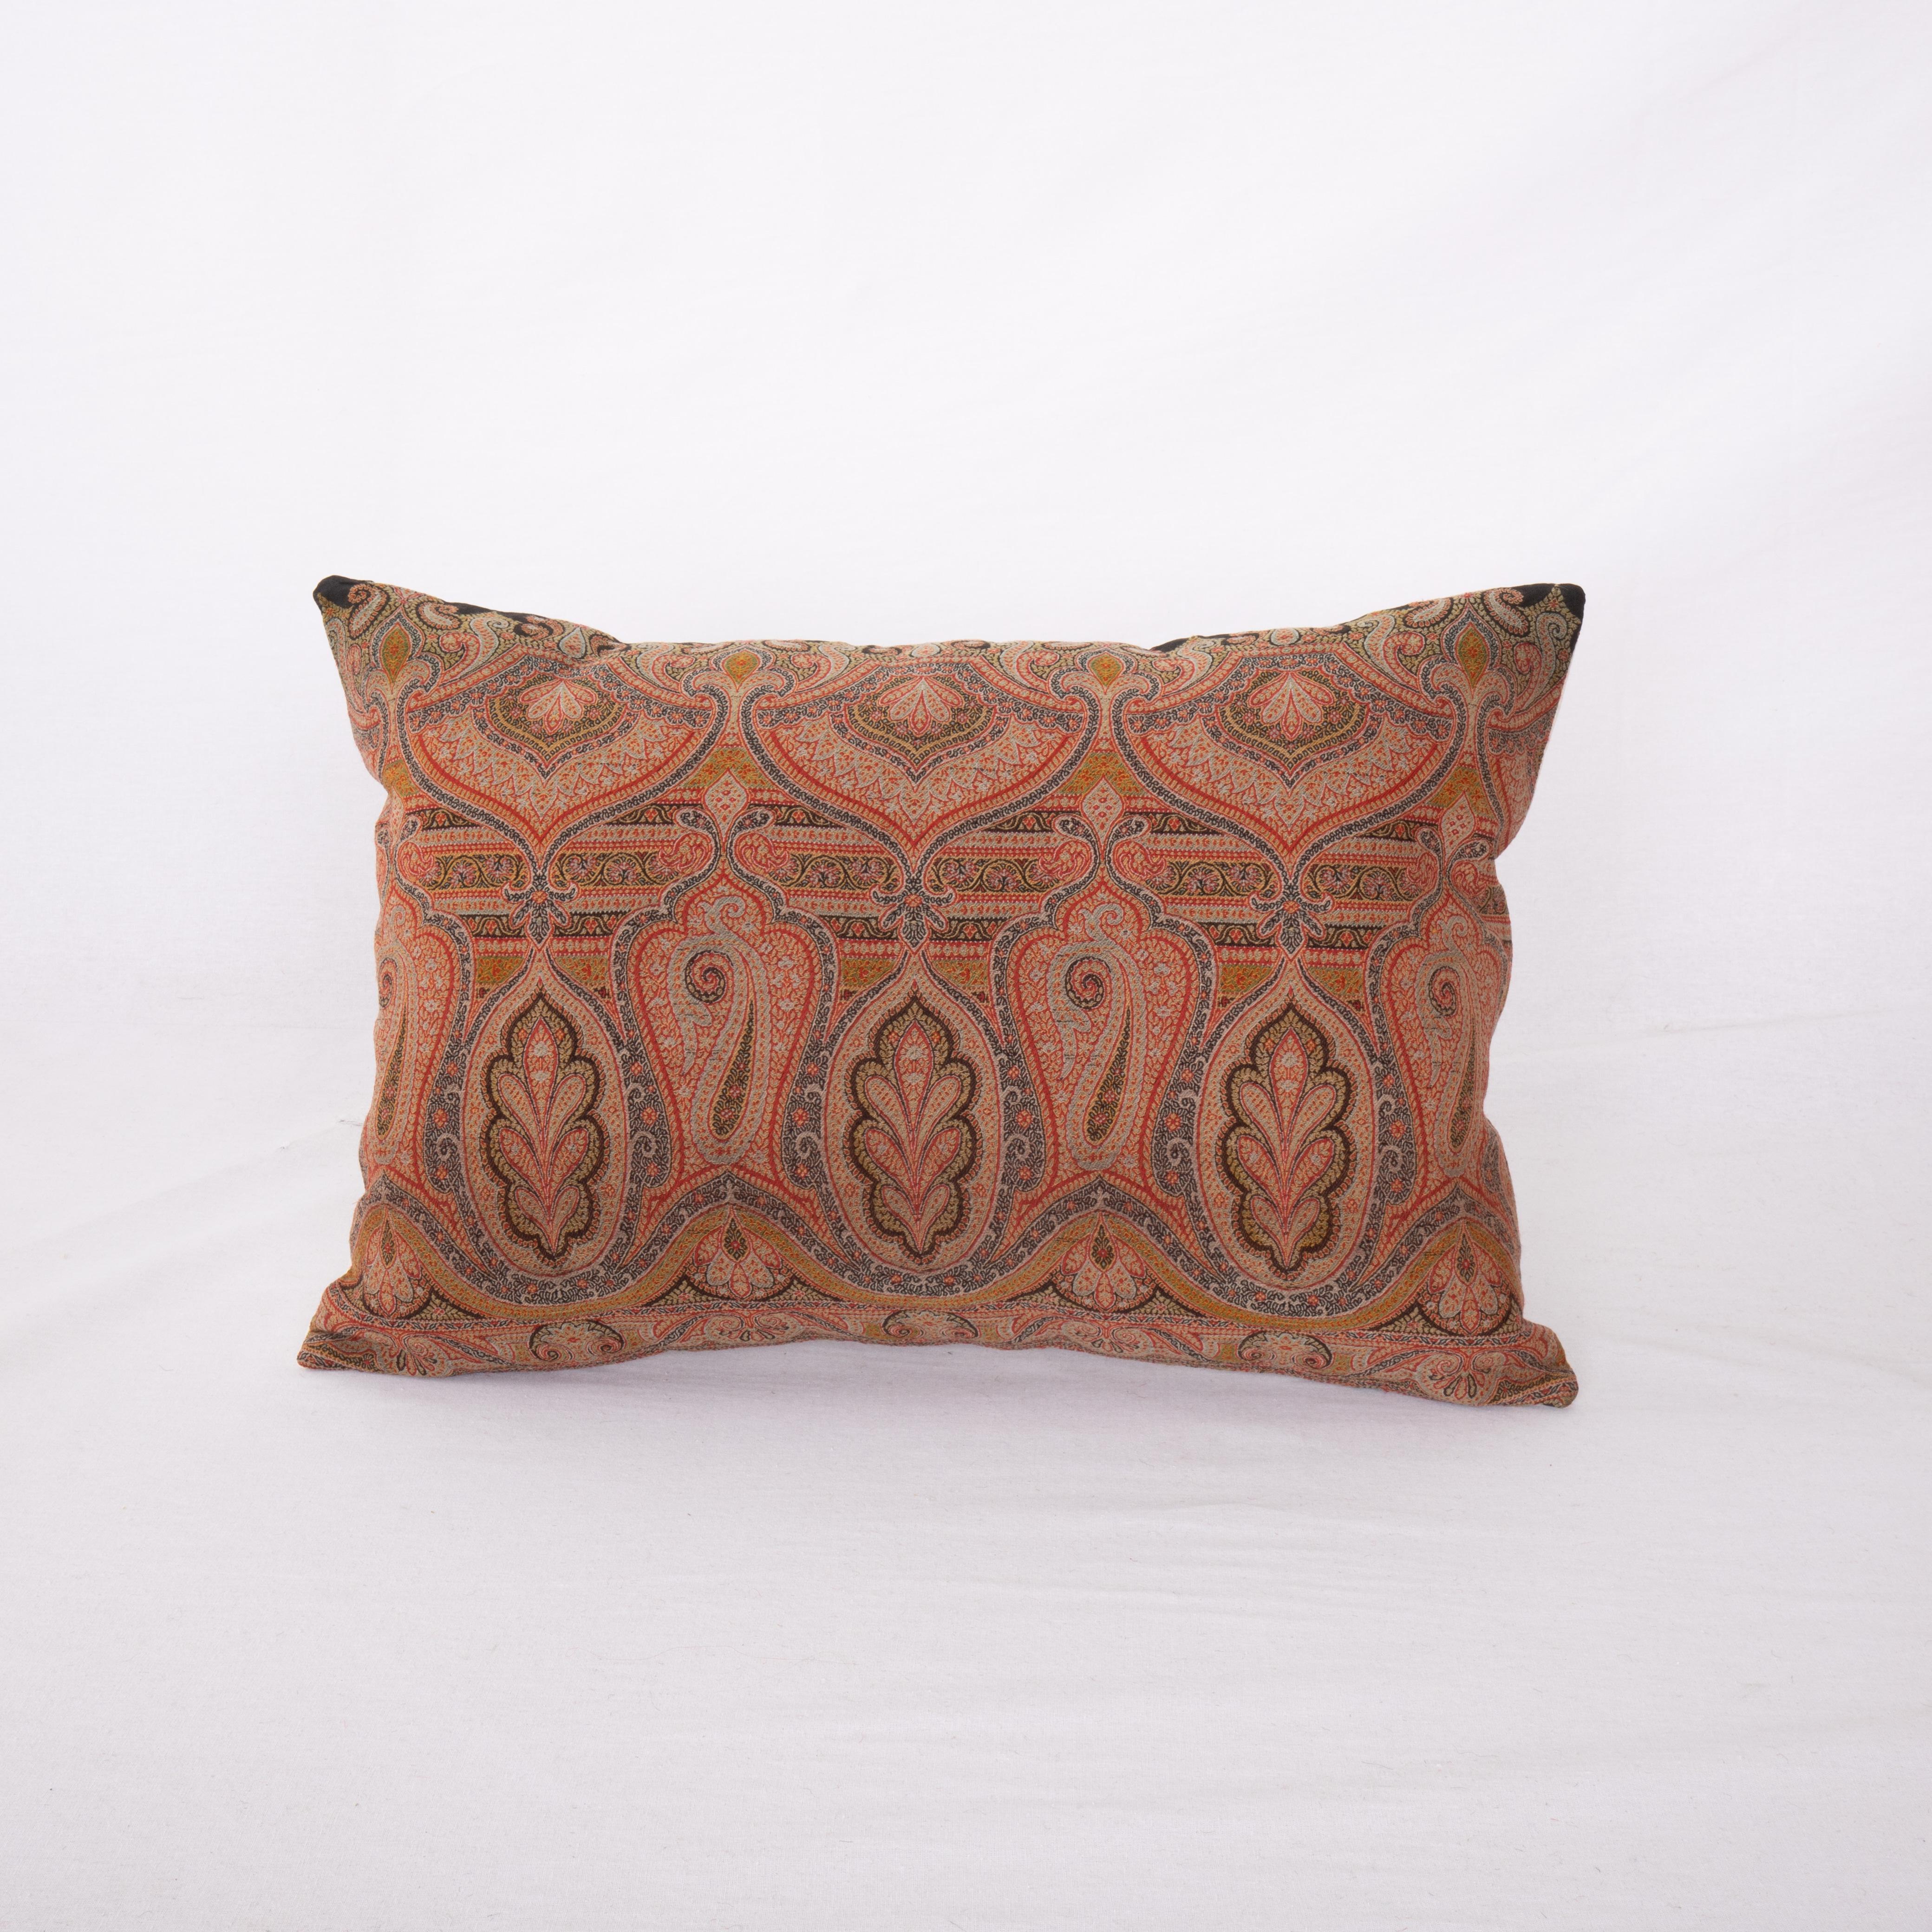 Antique Paisley pillow cover made from a European wool Paisley shawl, late 19th /early 20th century
It does not come with an insert.
Linen in the back.
Zipper closure.
Dry. Cleaning is reccommeded.

Antique European Paisley shawls are a type